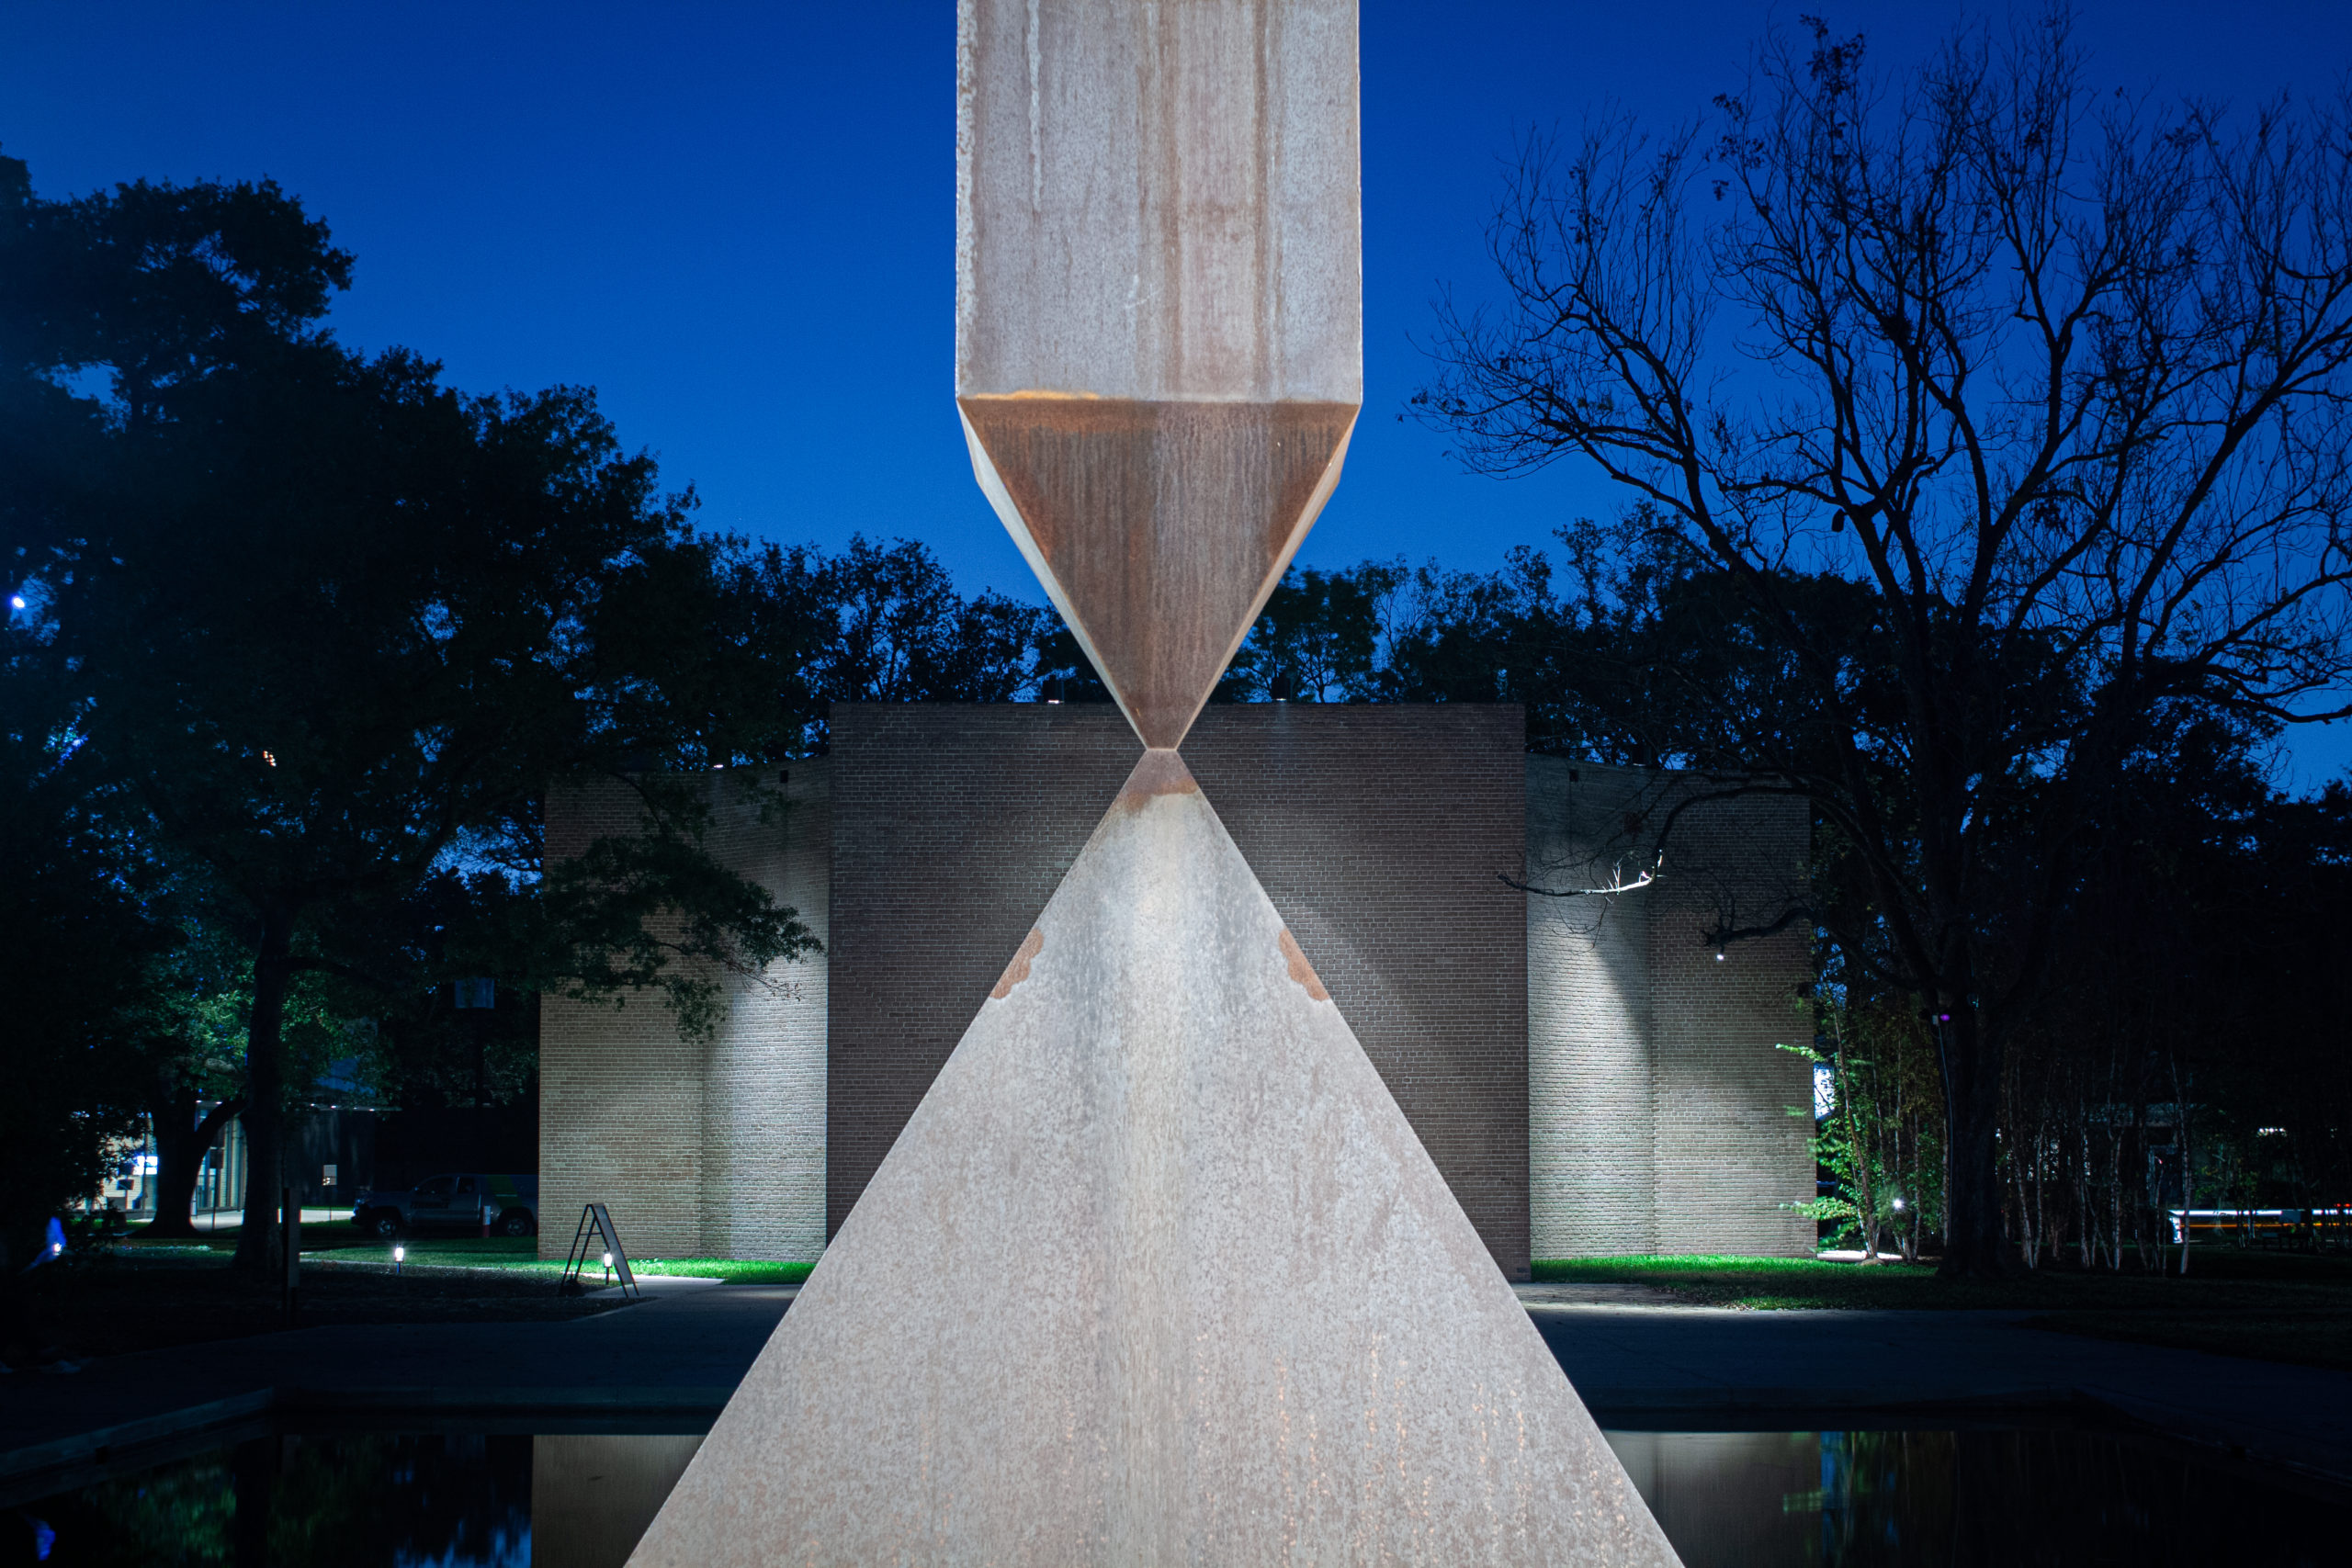 A broken granite obelisk balances, seemingly impossibly, on its point upon a pyramid of granite. This sculpture stands before Houston's Rothko Chapel, a rectangular grey brick building, seen under a clear sky at dusk.